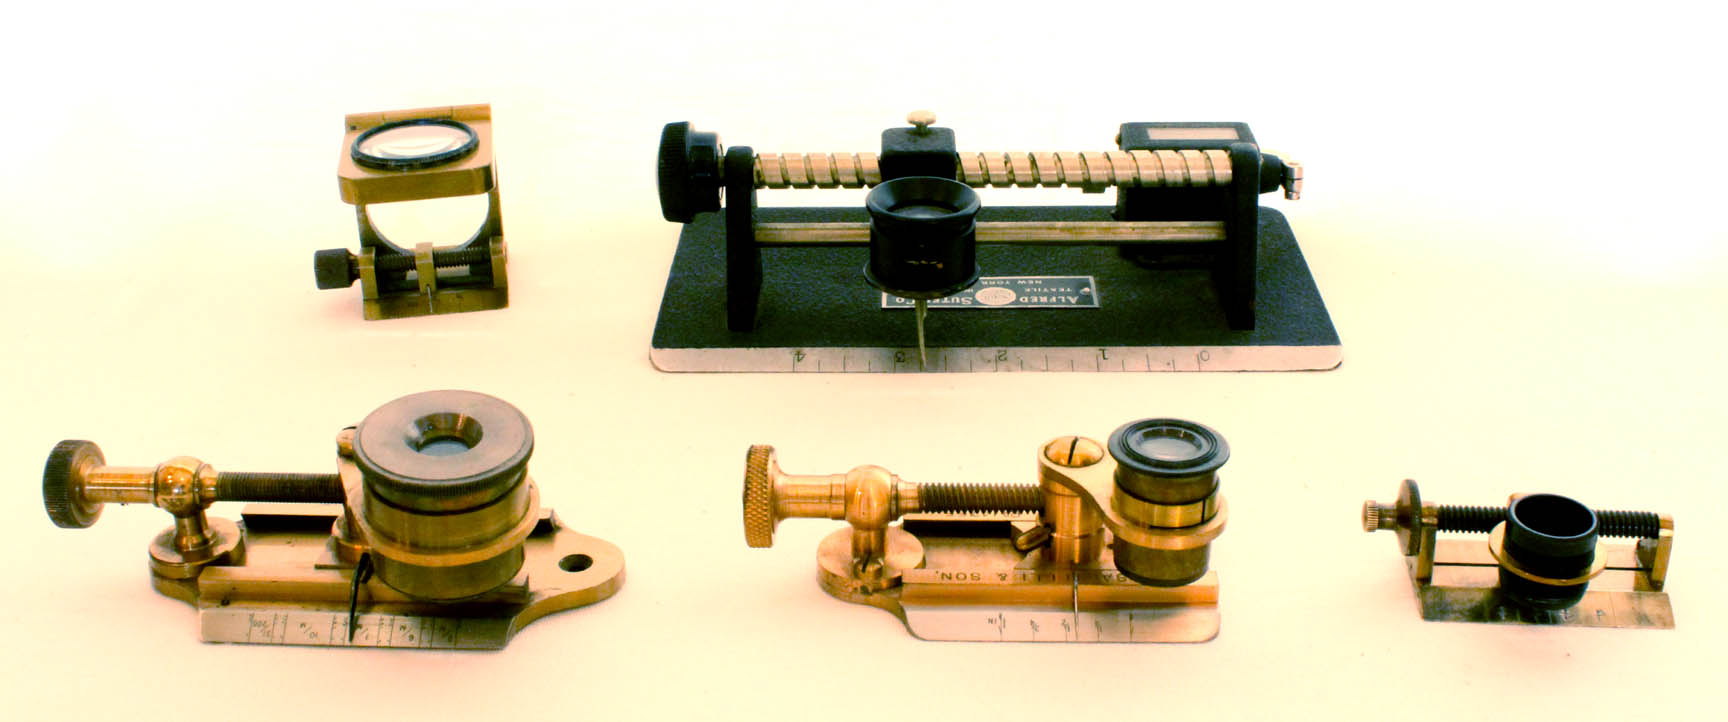 thread counting microscopes